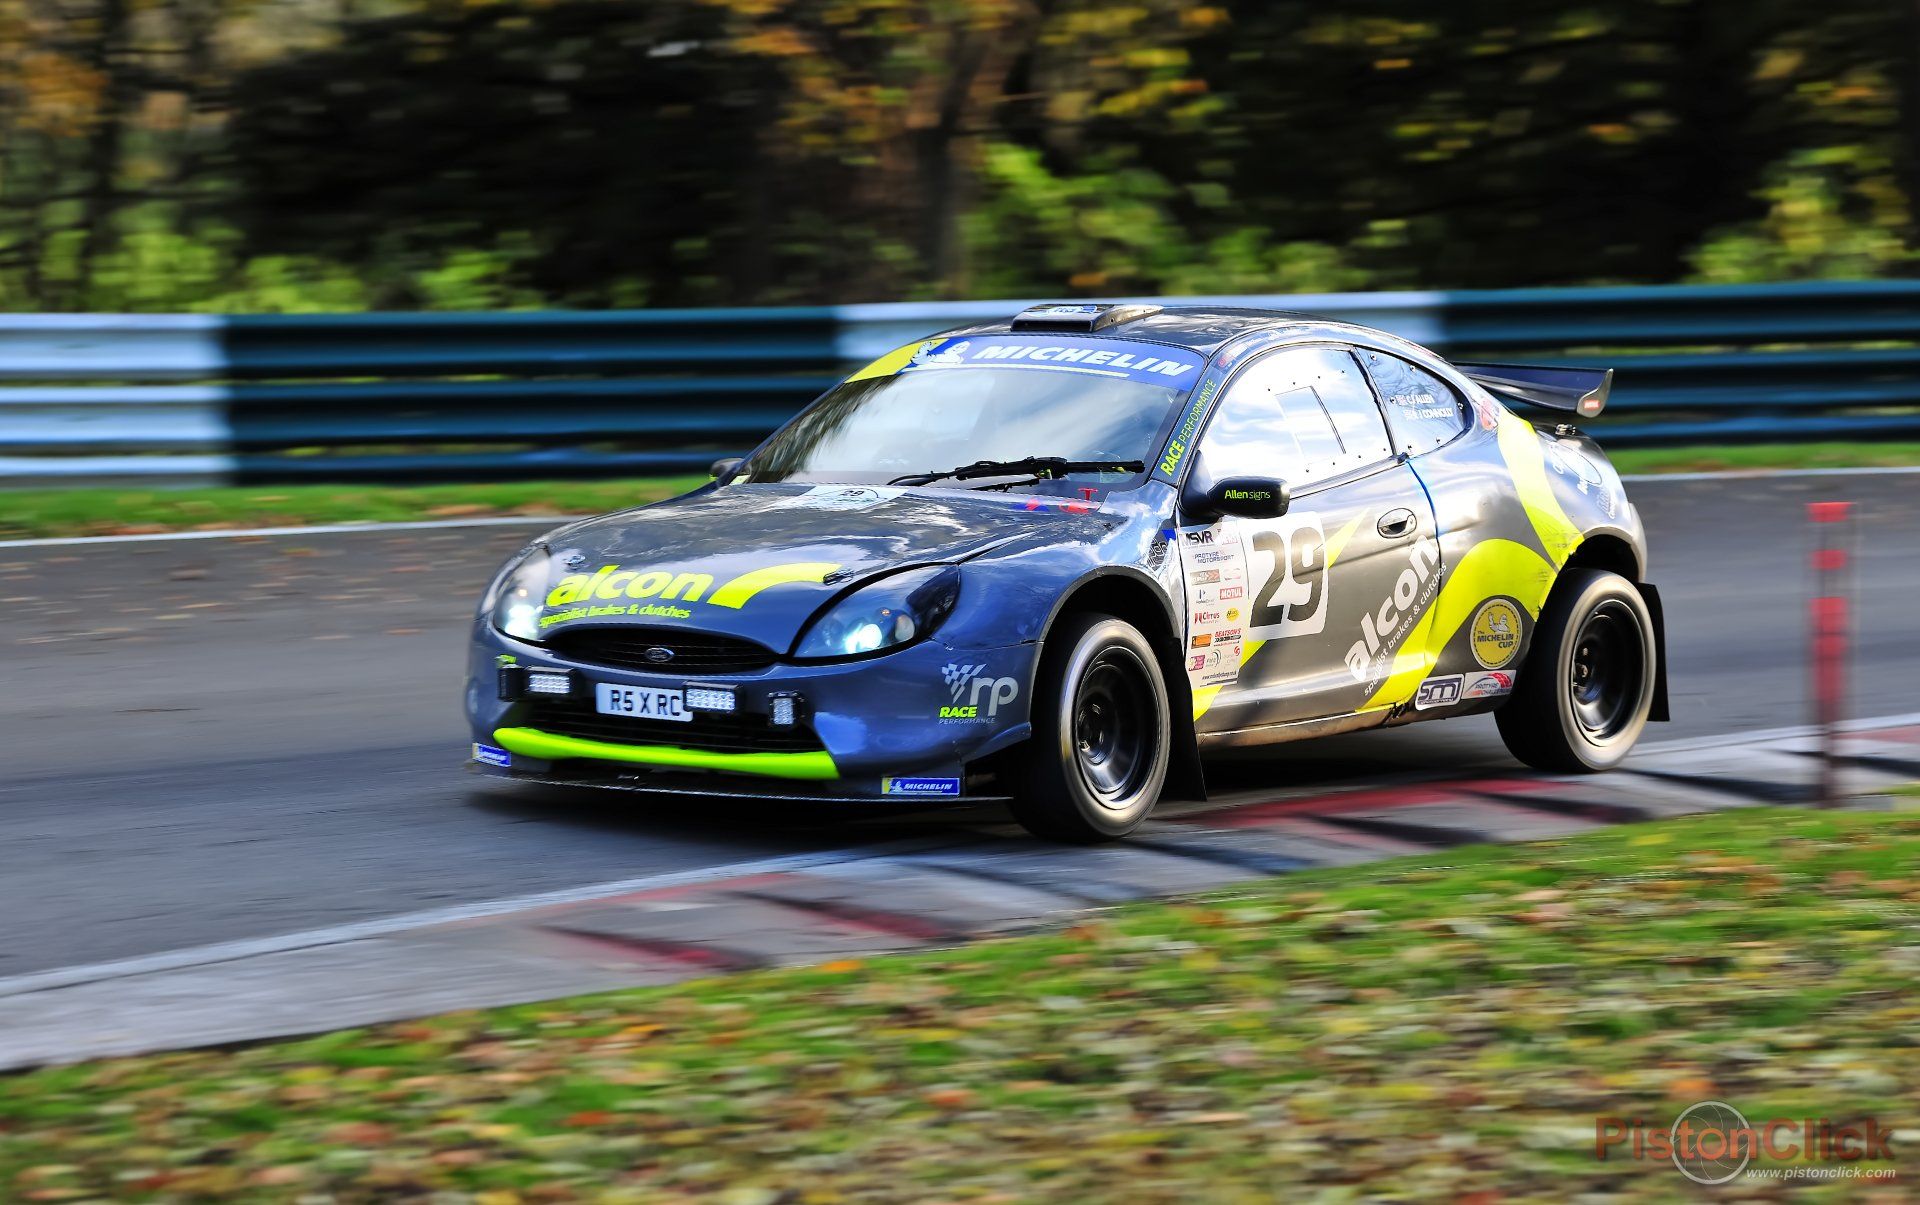 Ford Puma crewed by Ryan Connolly and Chris Allan